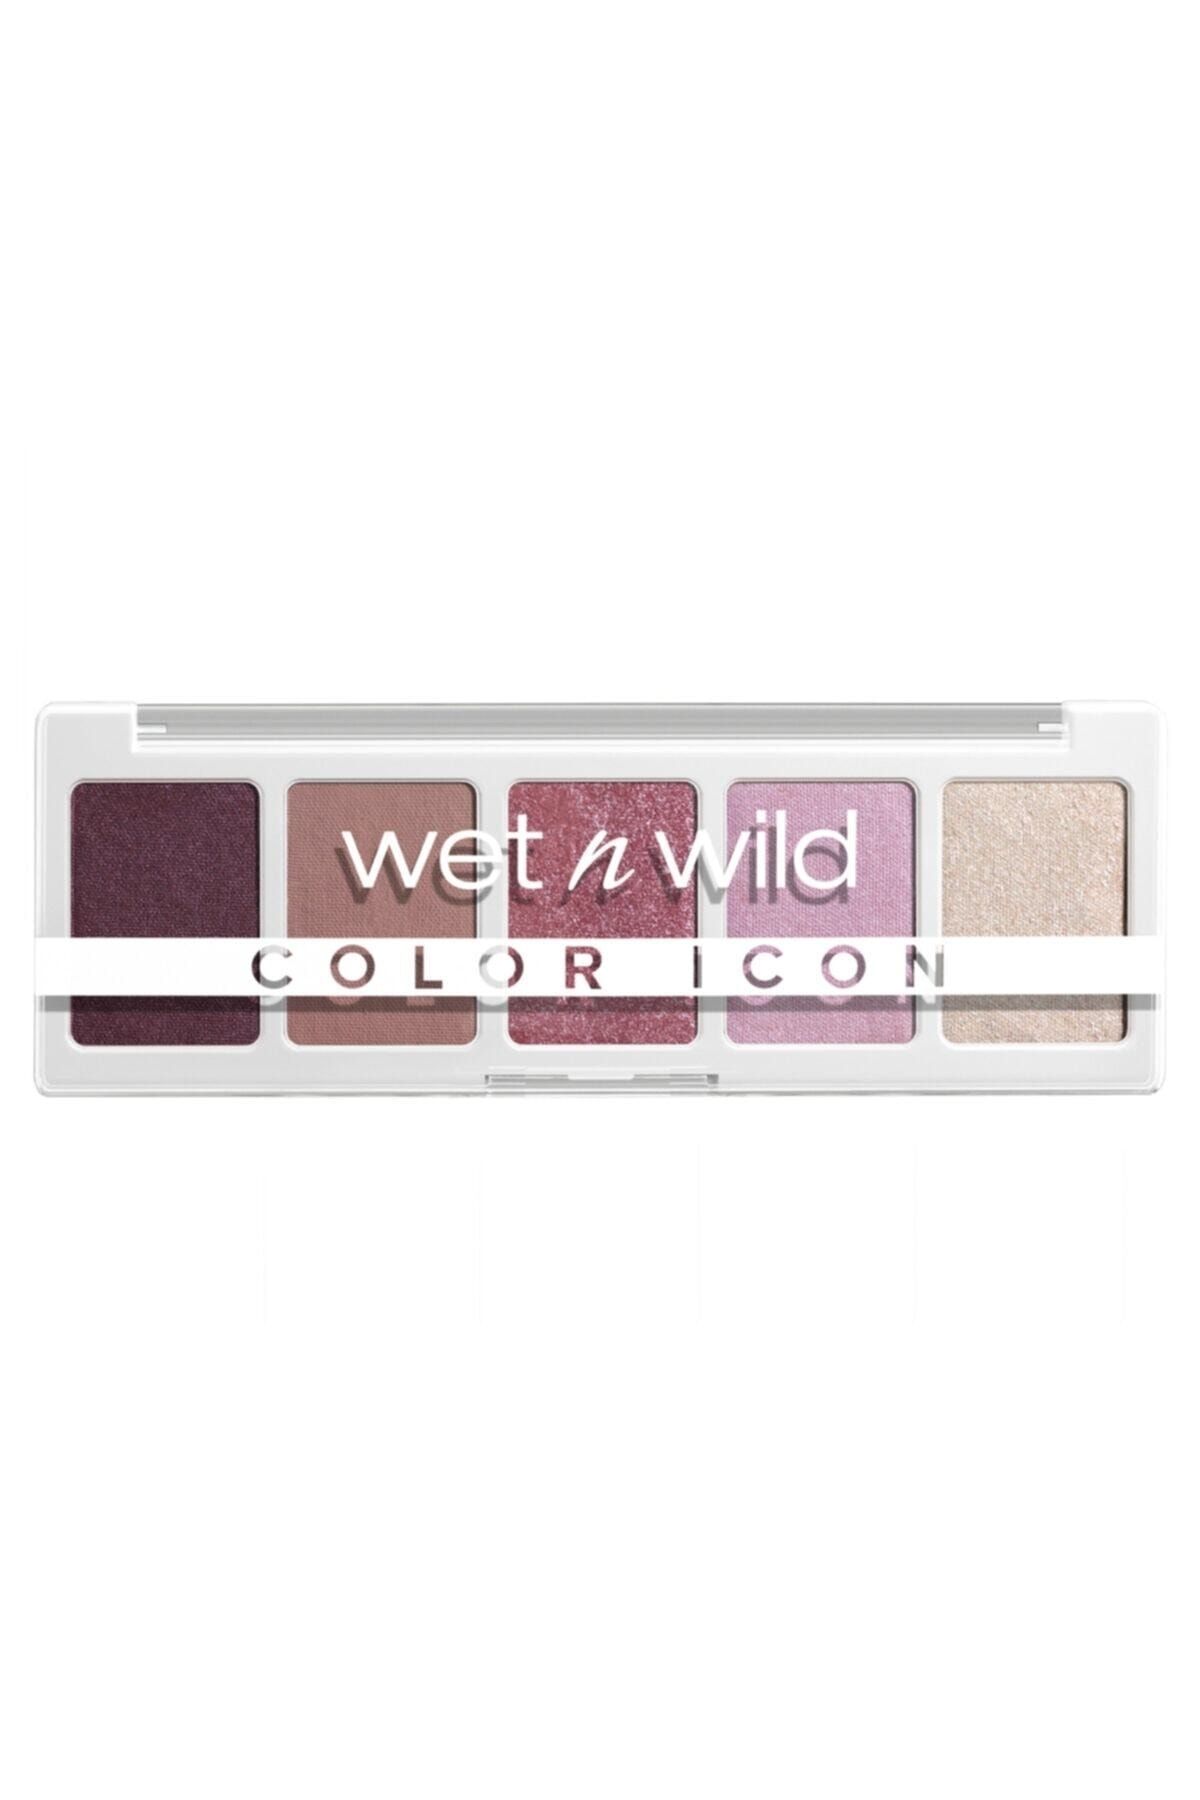 WET N WİLD Color Icon 5 Pan Eyeshadow Palette Forget Me Not